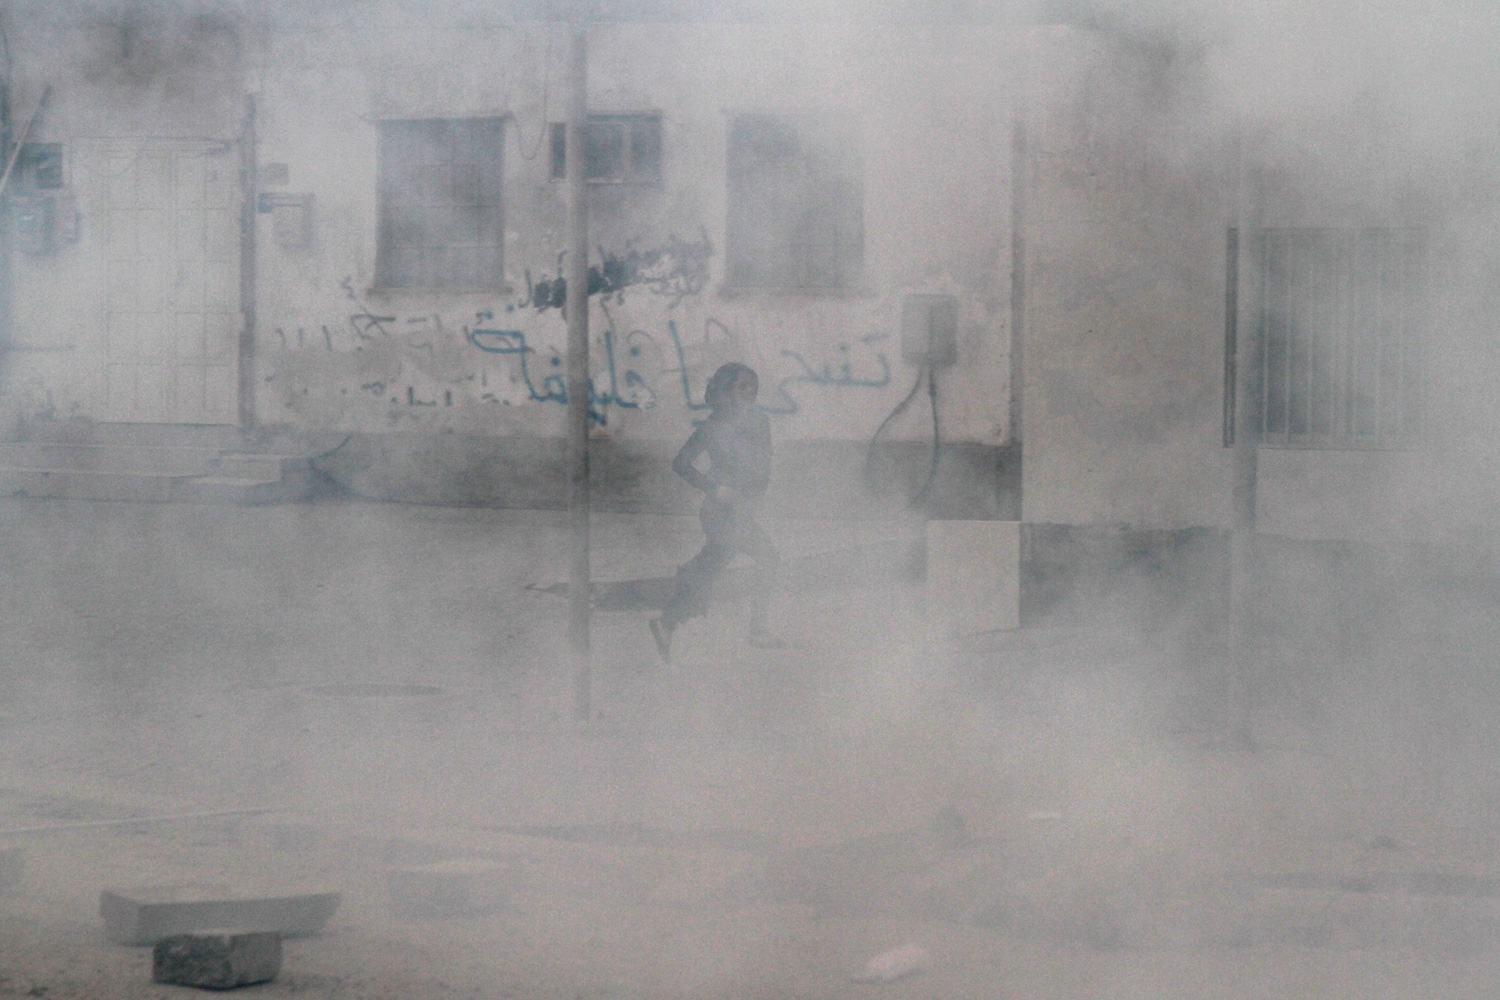 April 2, 2012. A Bahraini anti-government protester runs from tear gas, past a wall covered in anti-government graffiti, during clashes with riot police in Salmabad, Bahrain.